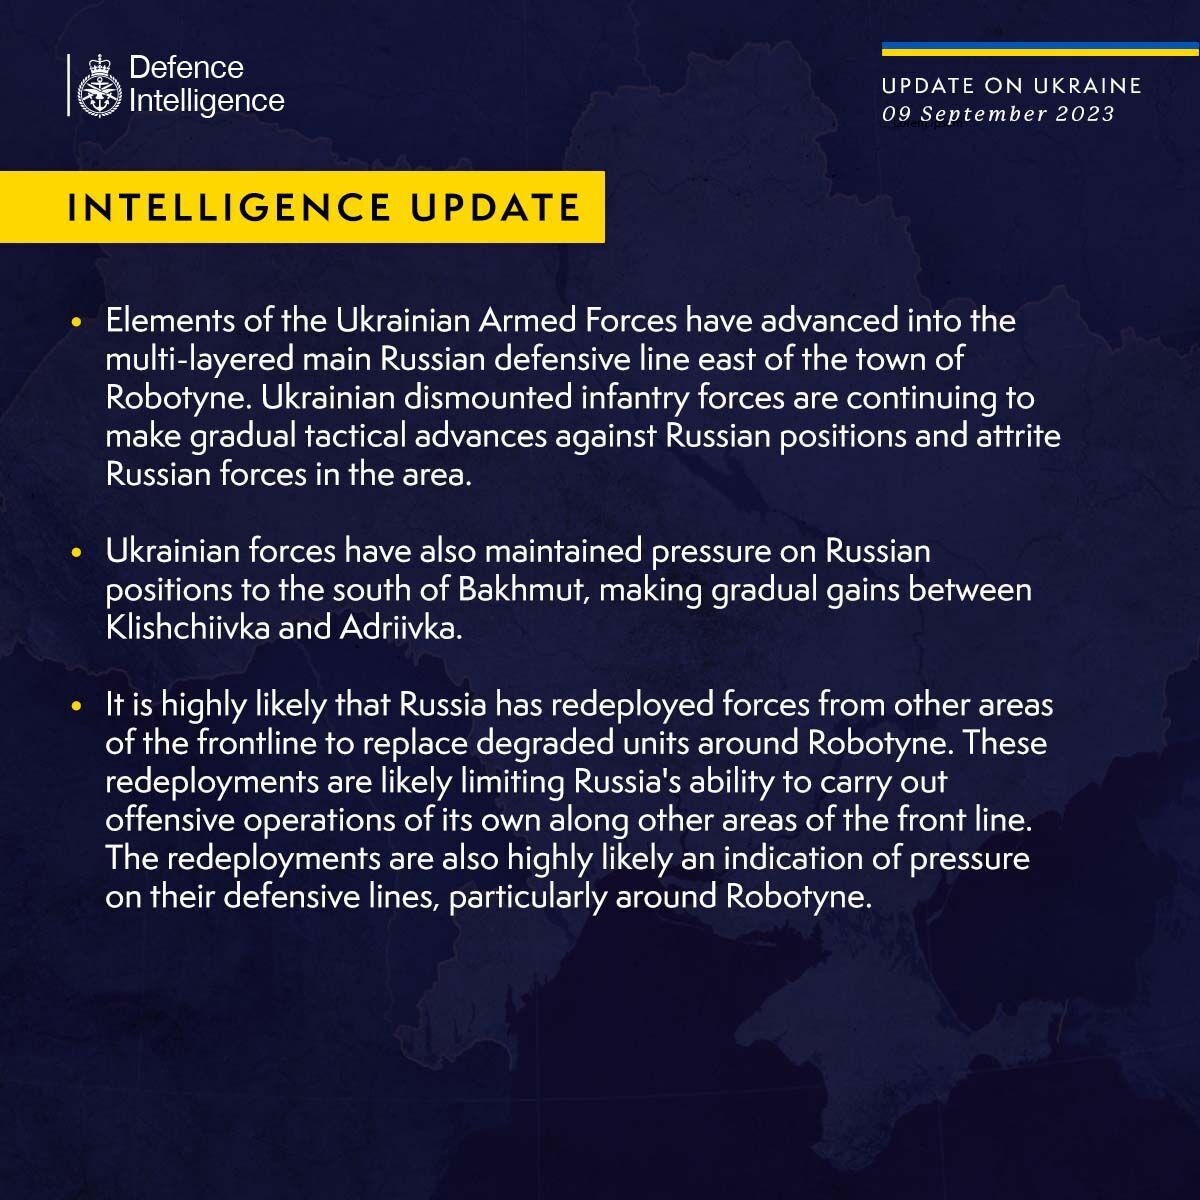 British intelligence: Ukrainian military advances near Robotyne and Bakhmut, Russian Federation transfers forces from other areas